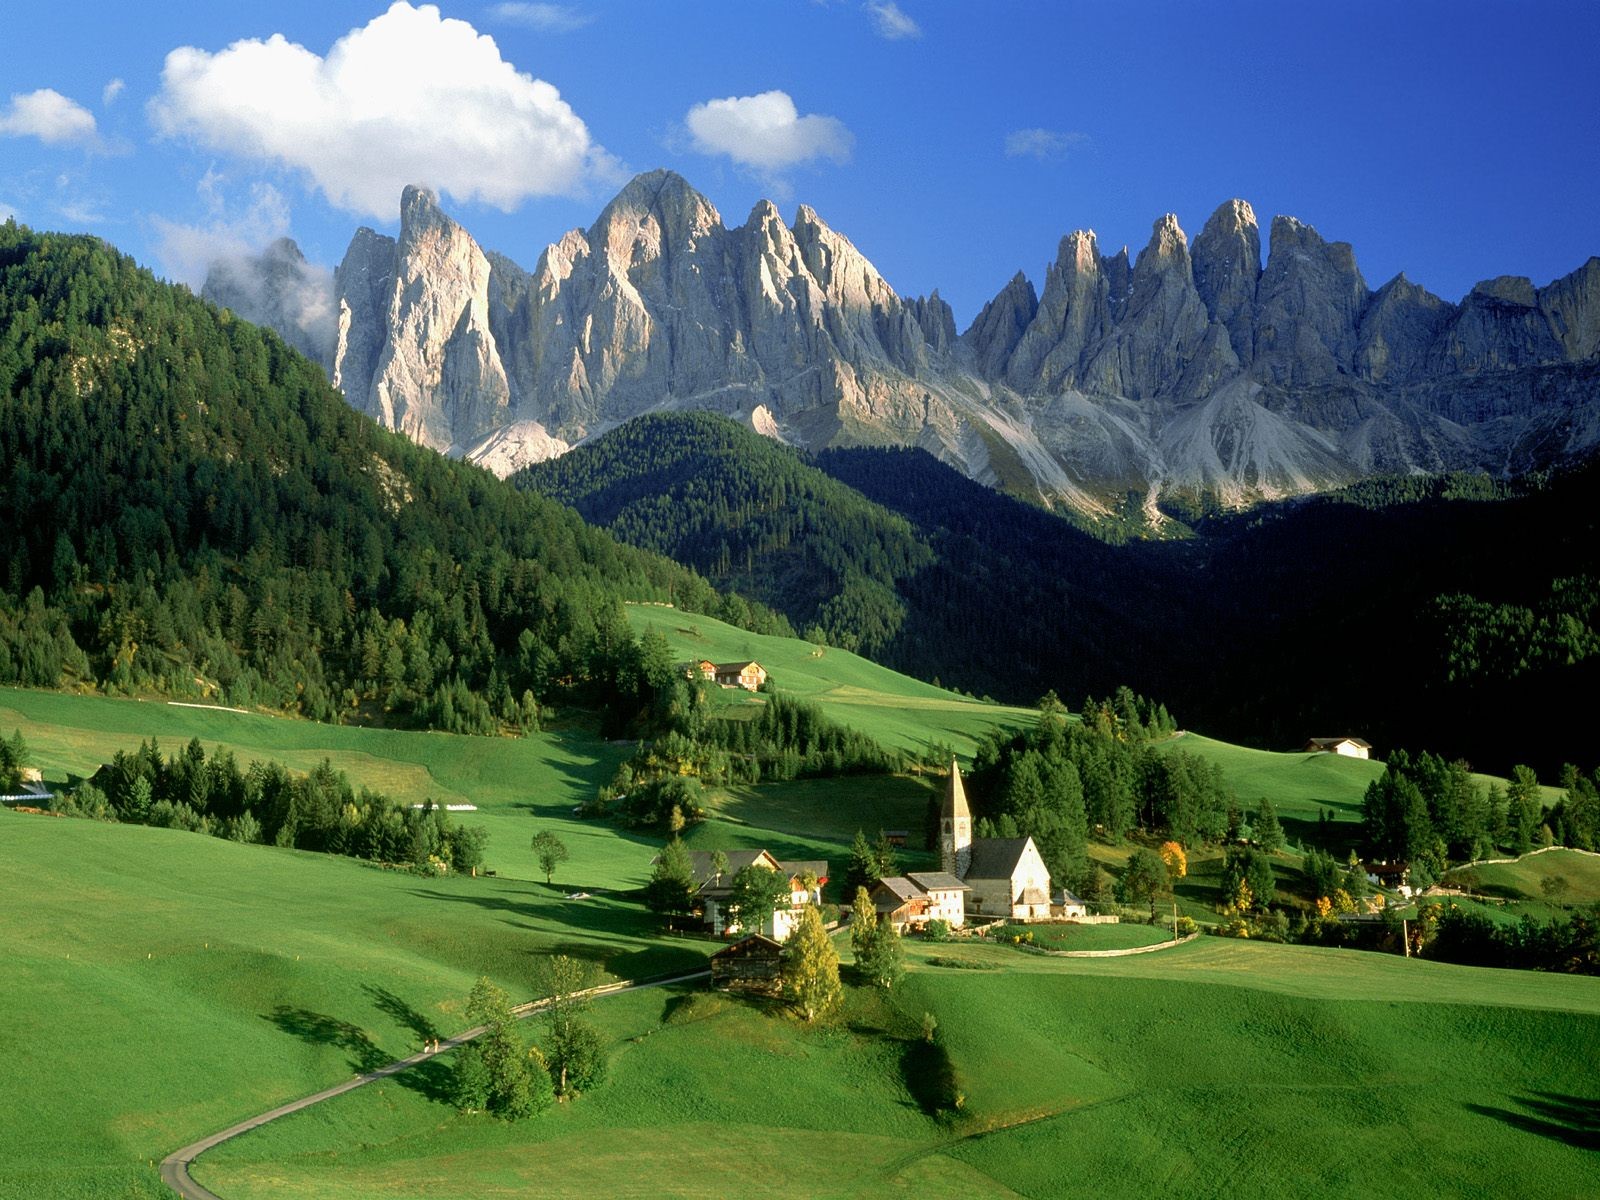 Italy Scenery Wallpapers HD #40 - 1600x1200